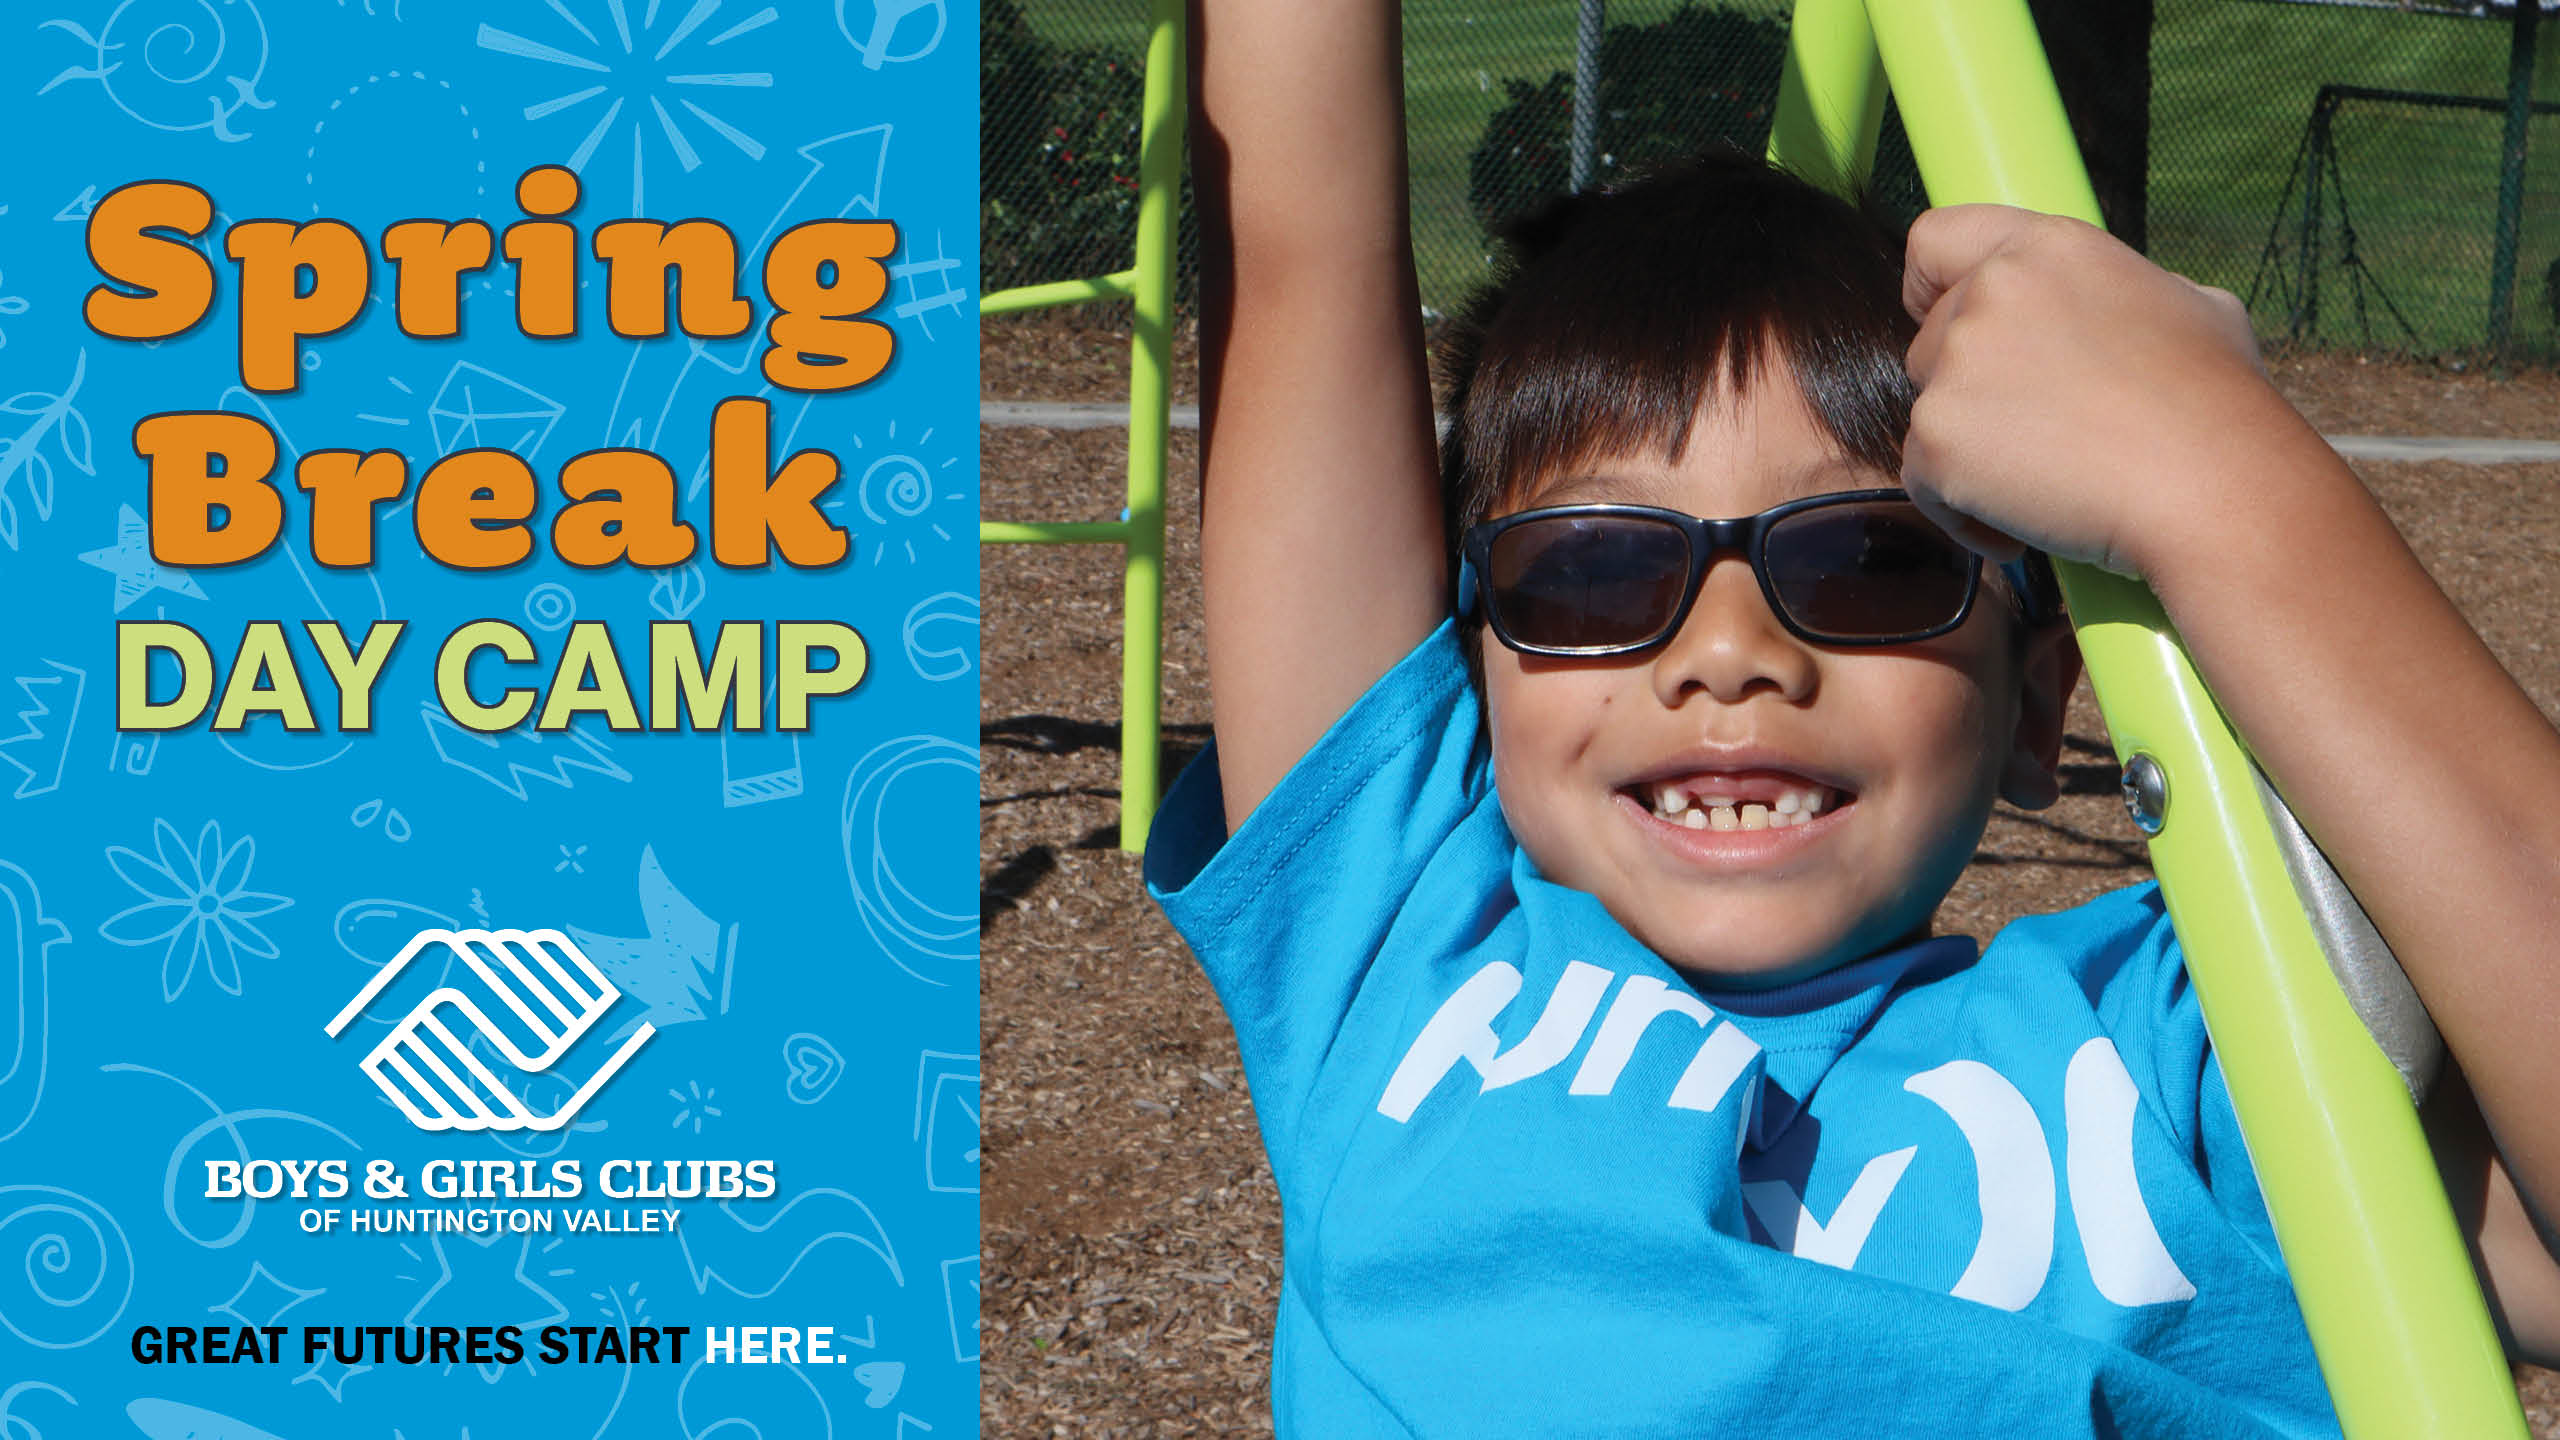 Spring Break Day Camp Boys and Girls Clubs of Huntington Valley